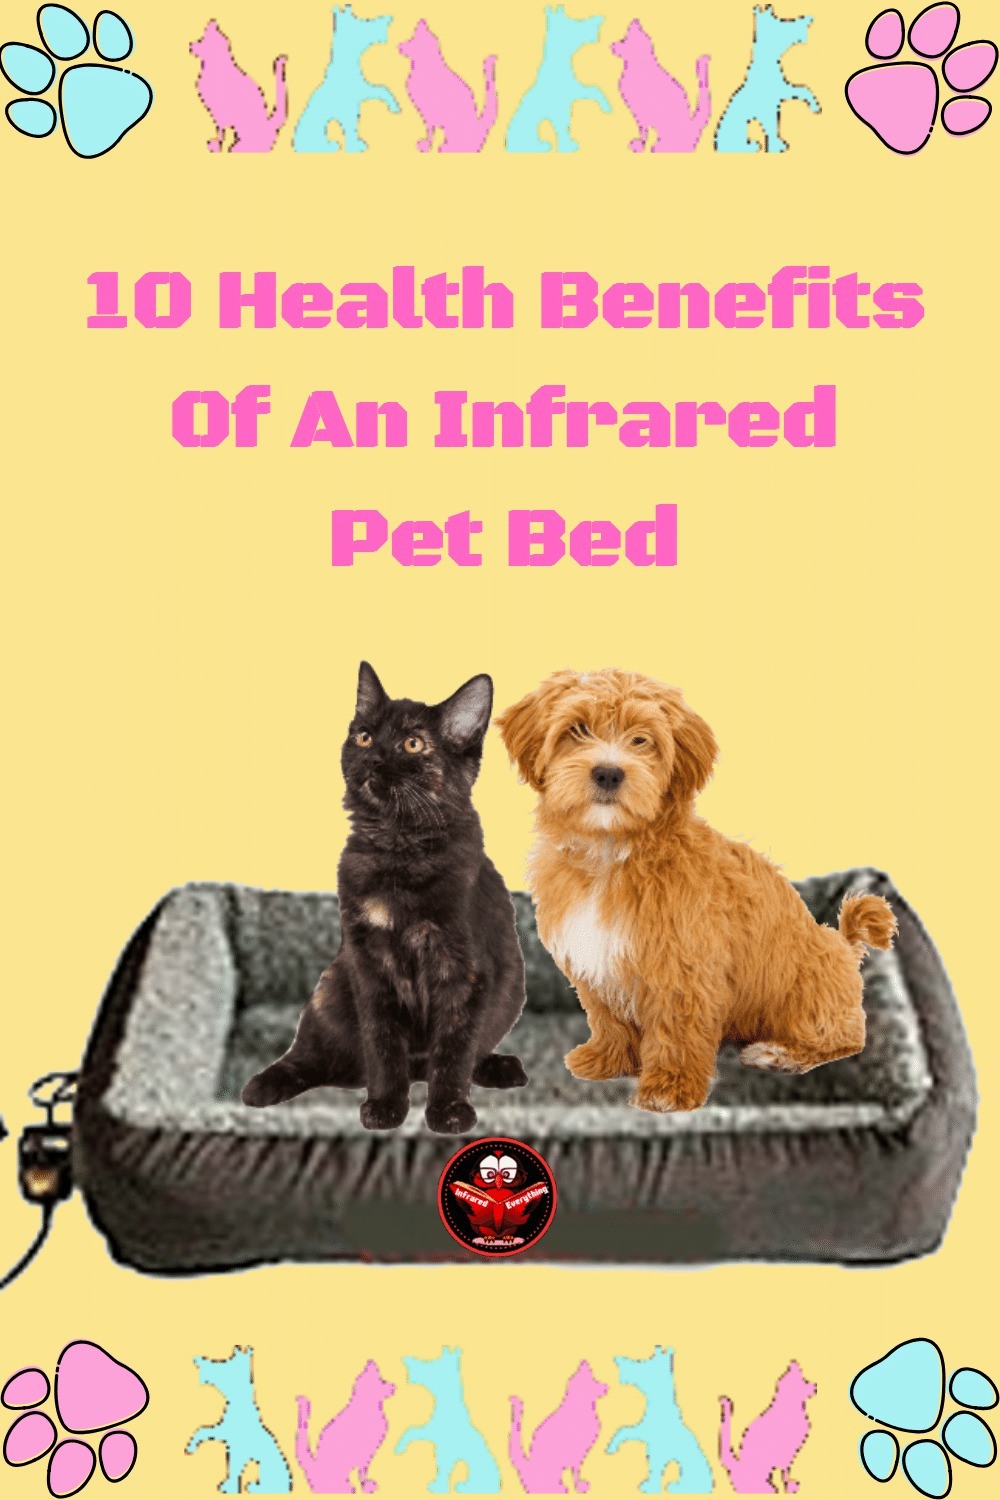 Dog & Cat Sitting On Infrared Pet Bed